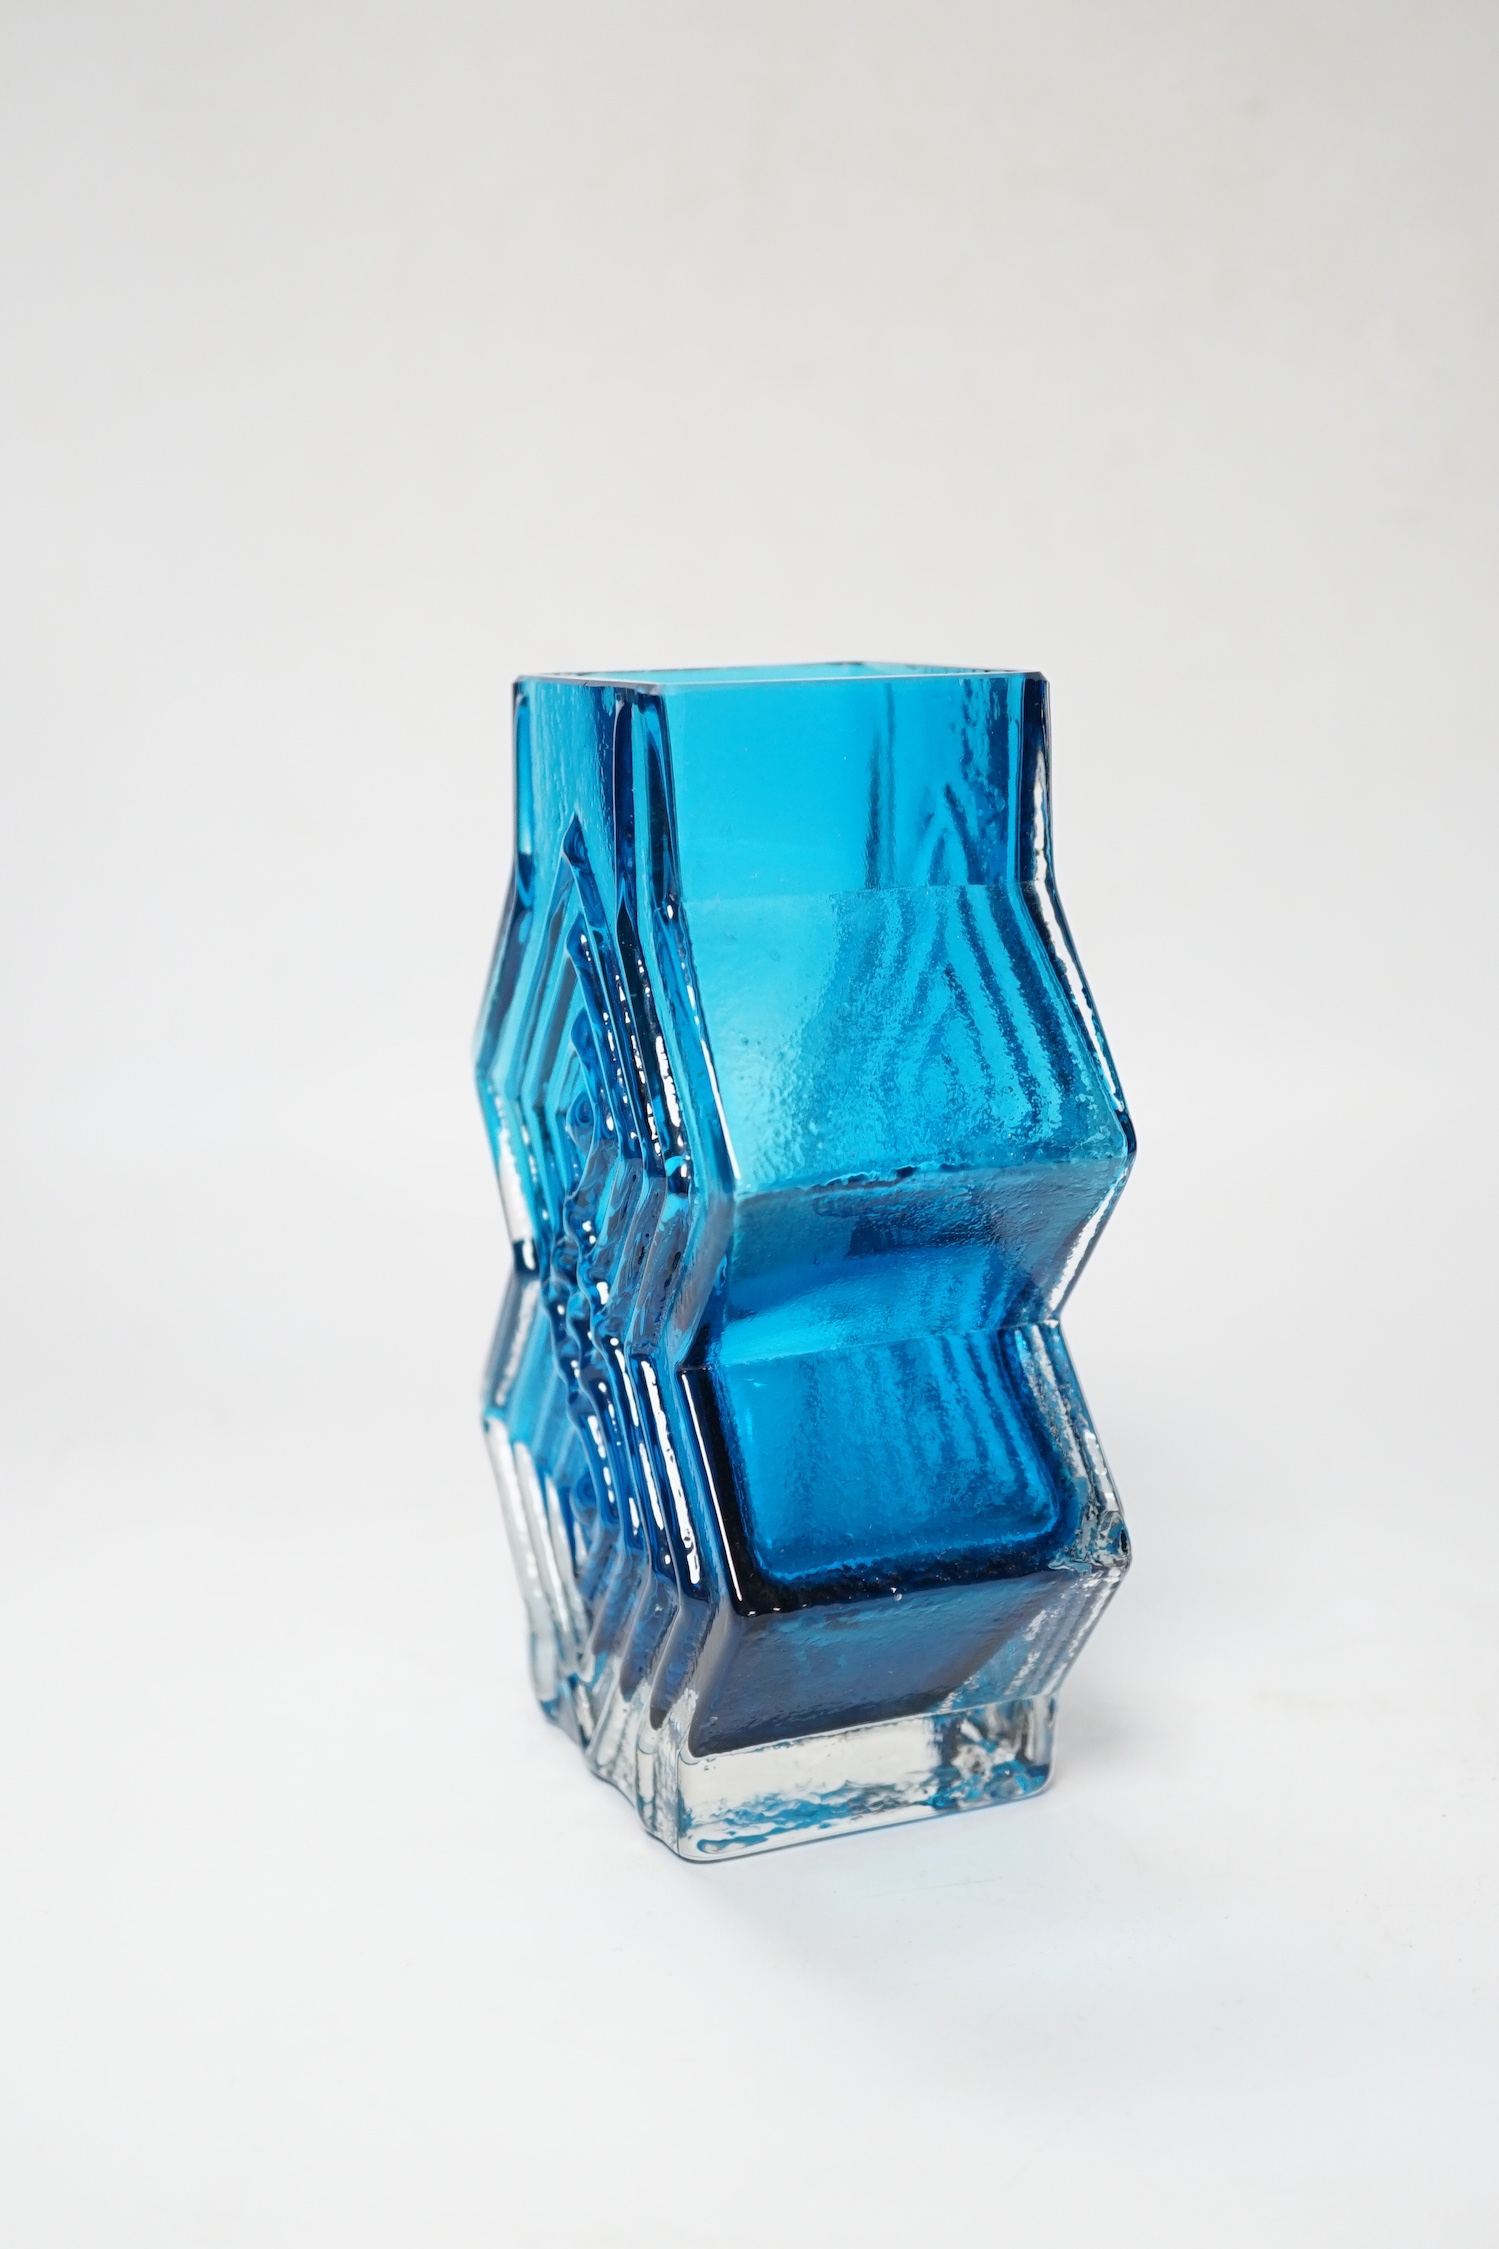 A Geoffrey Baxter for Whitefriars double diamond vase in kingfisher blue, 16cm high